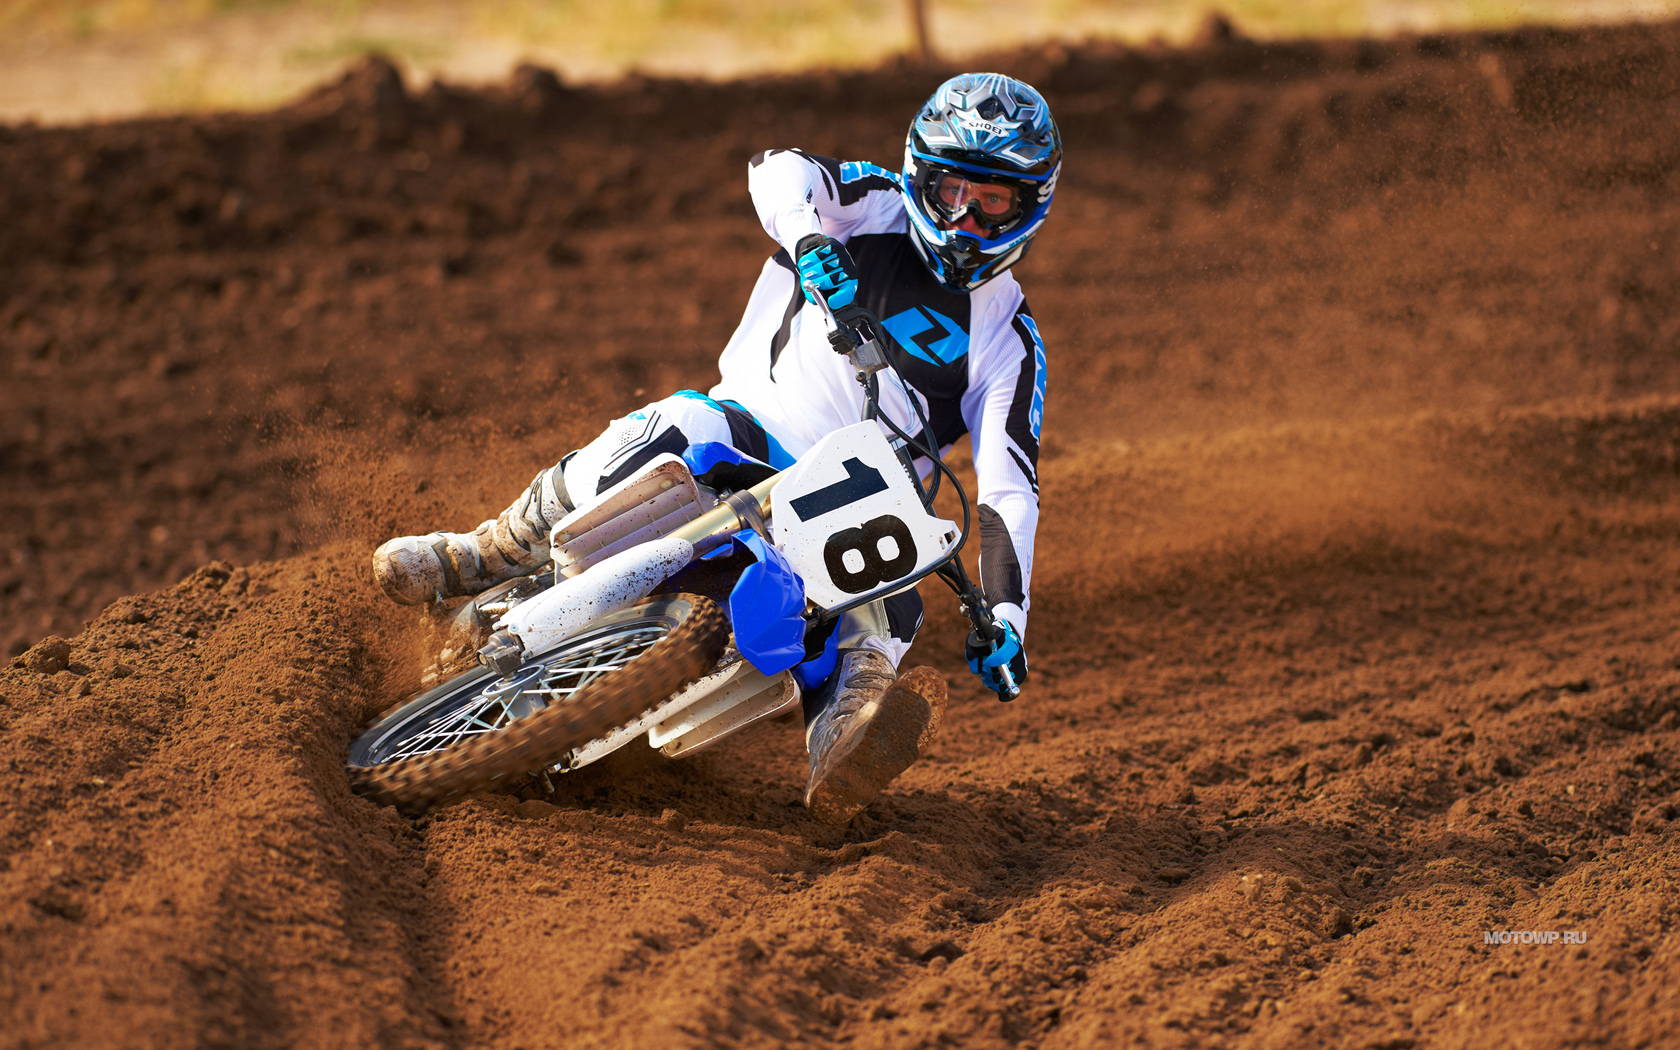 2017 yamaha yz450f review | motocross track test